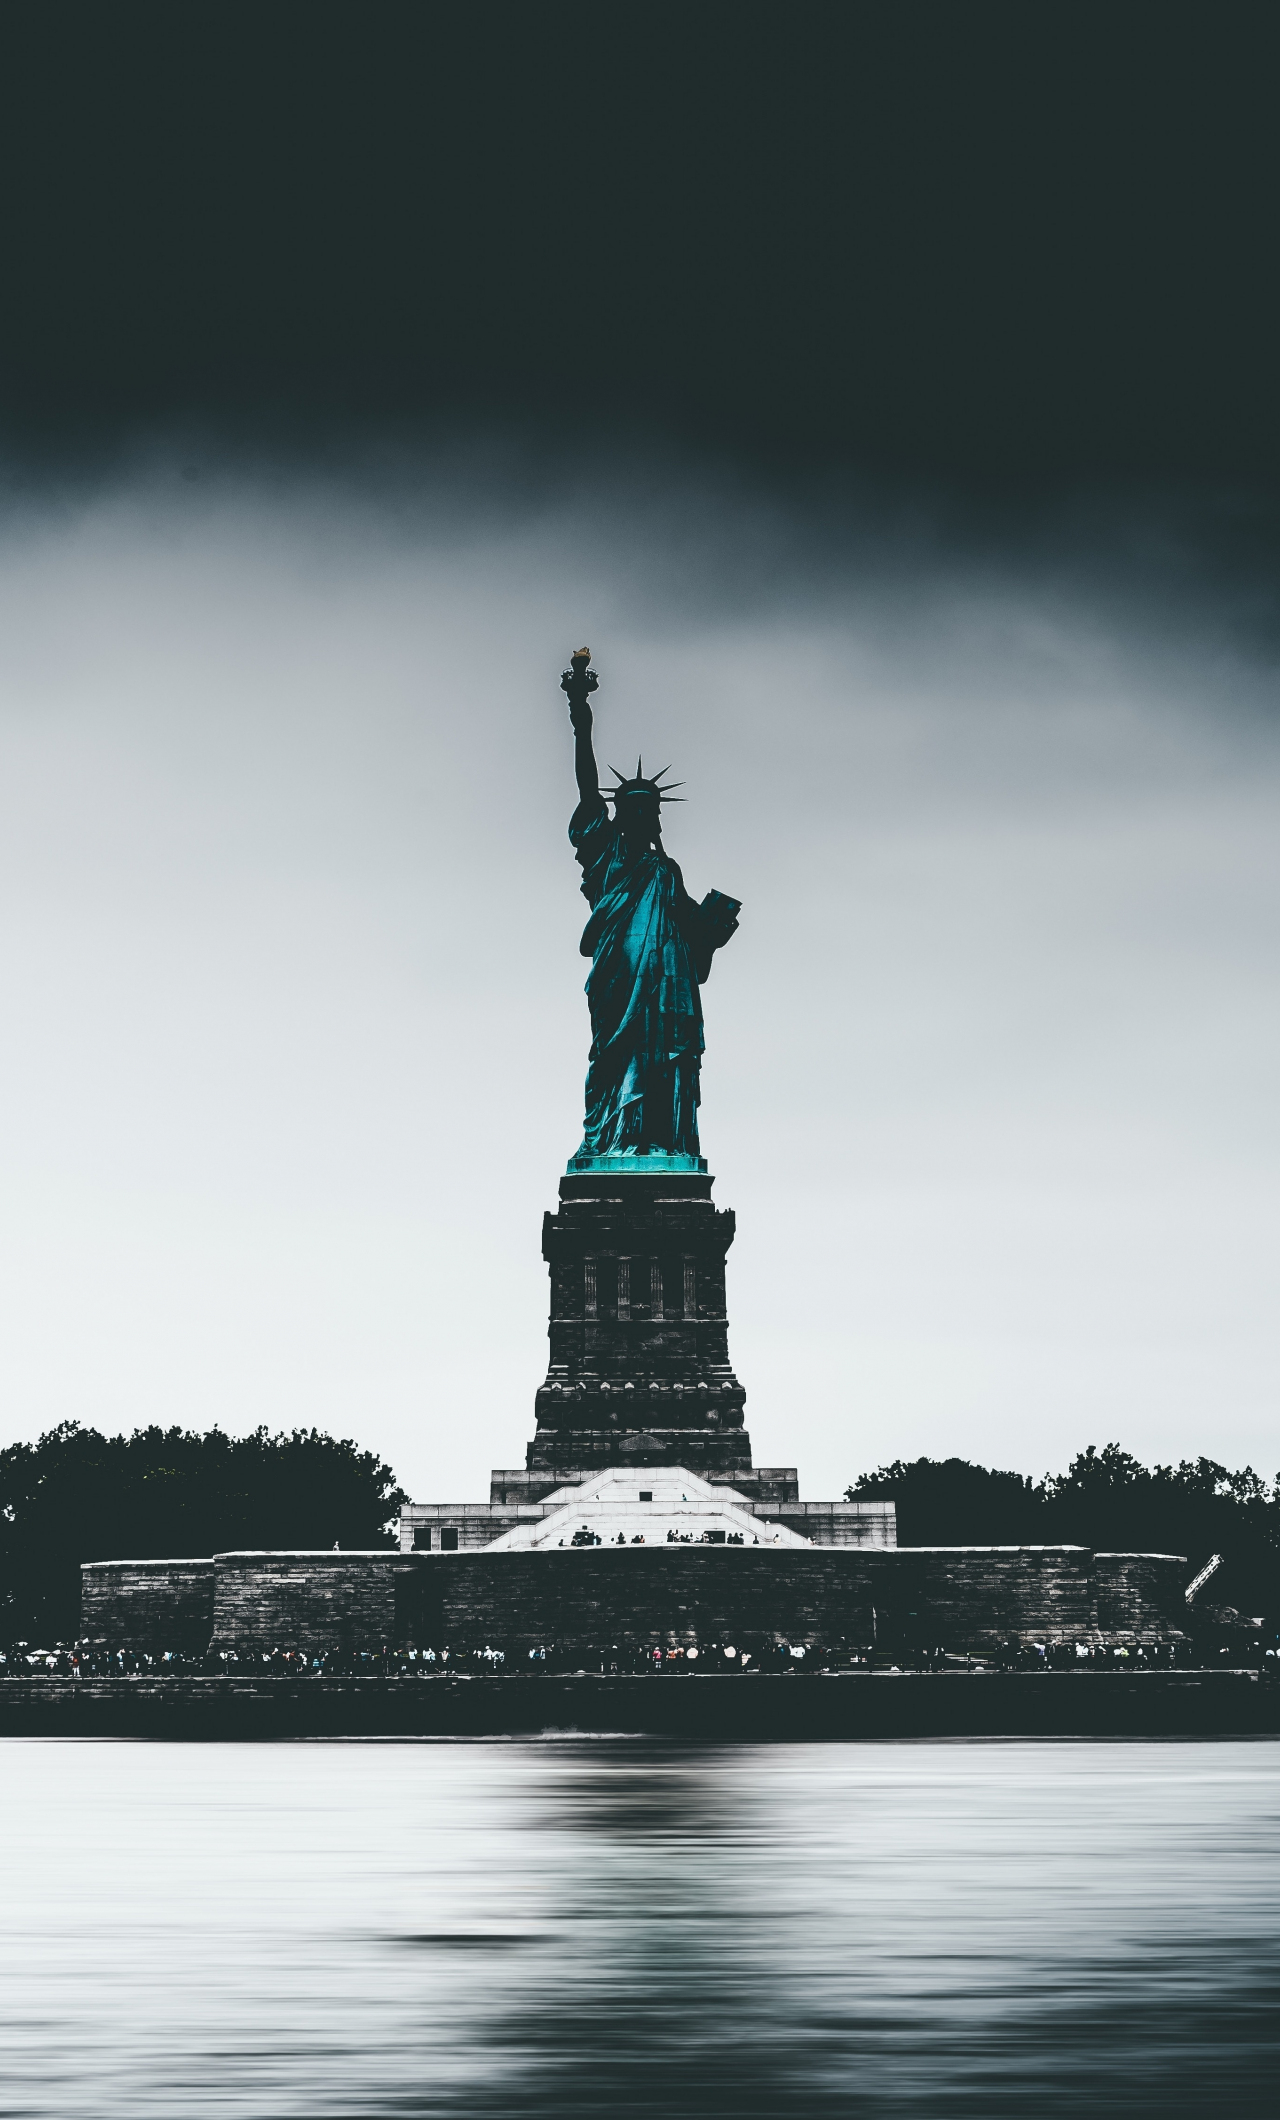 1280x2120 Download statue of liberty, city, new york wallpaper, iphone 6 plus, hd image, background, 10391